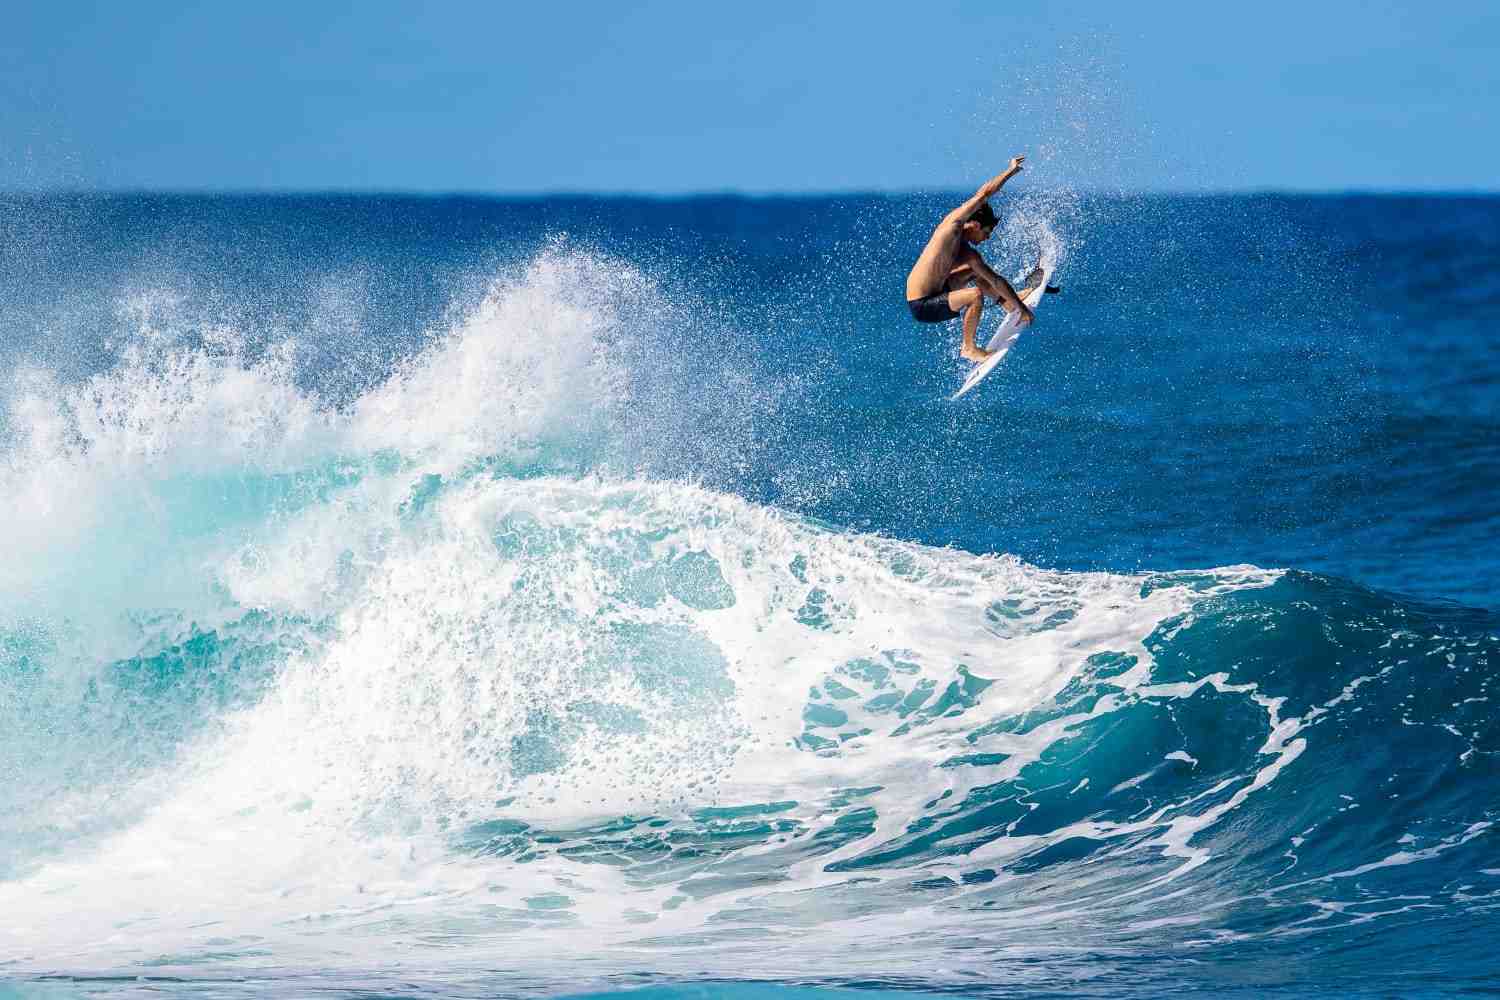 How does surfing change your body?